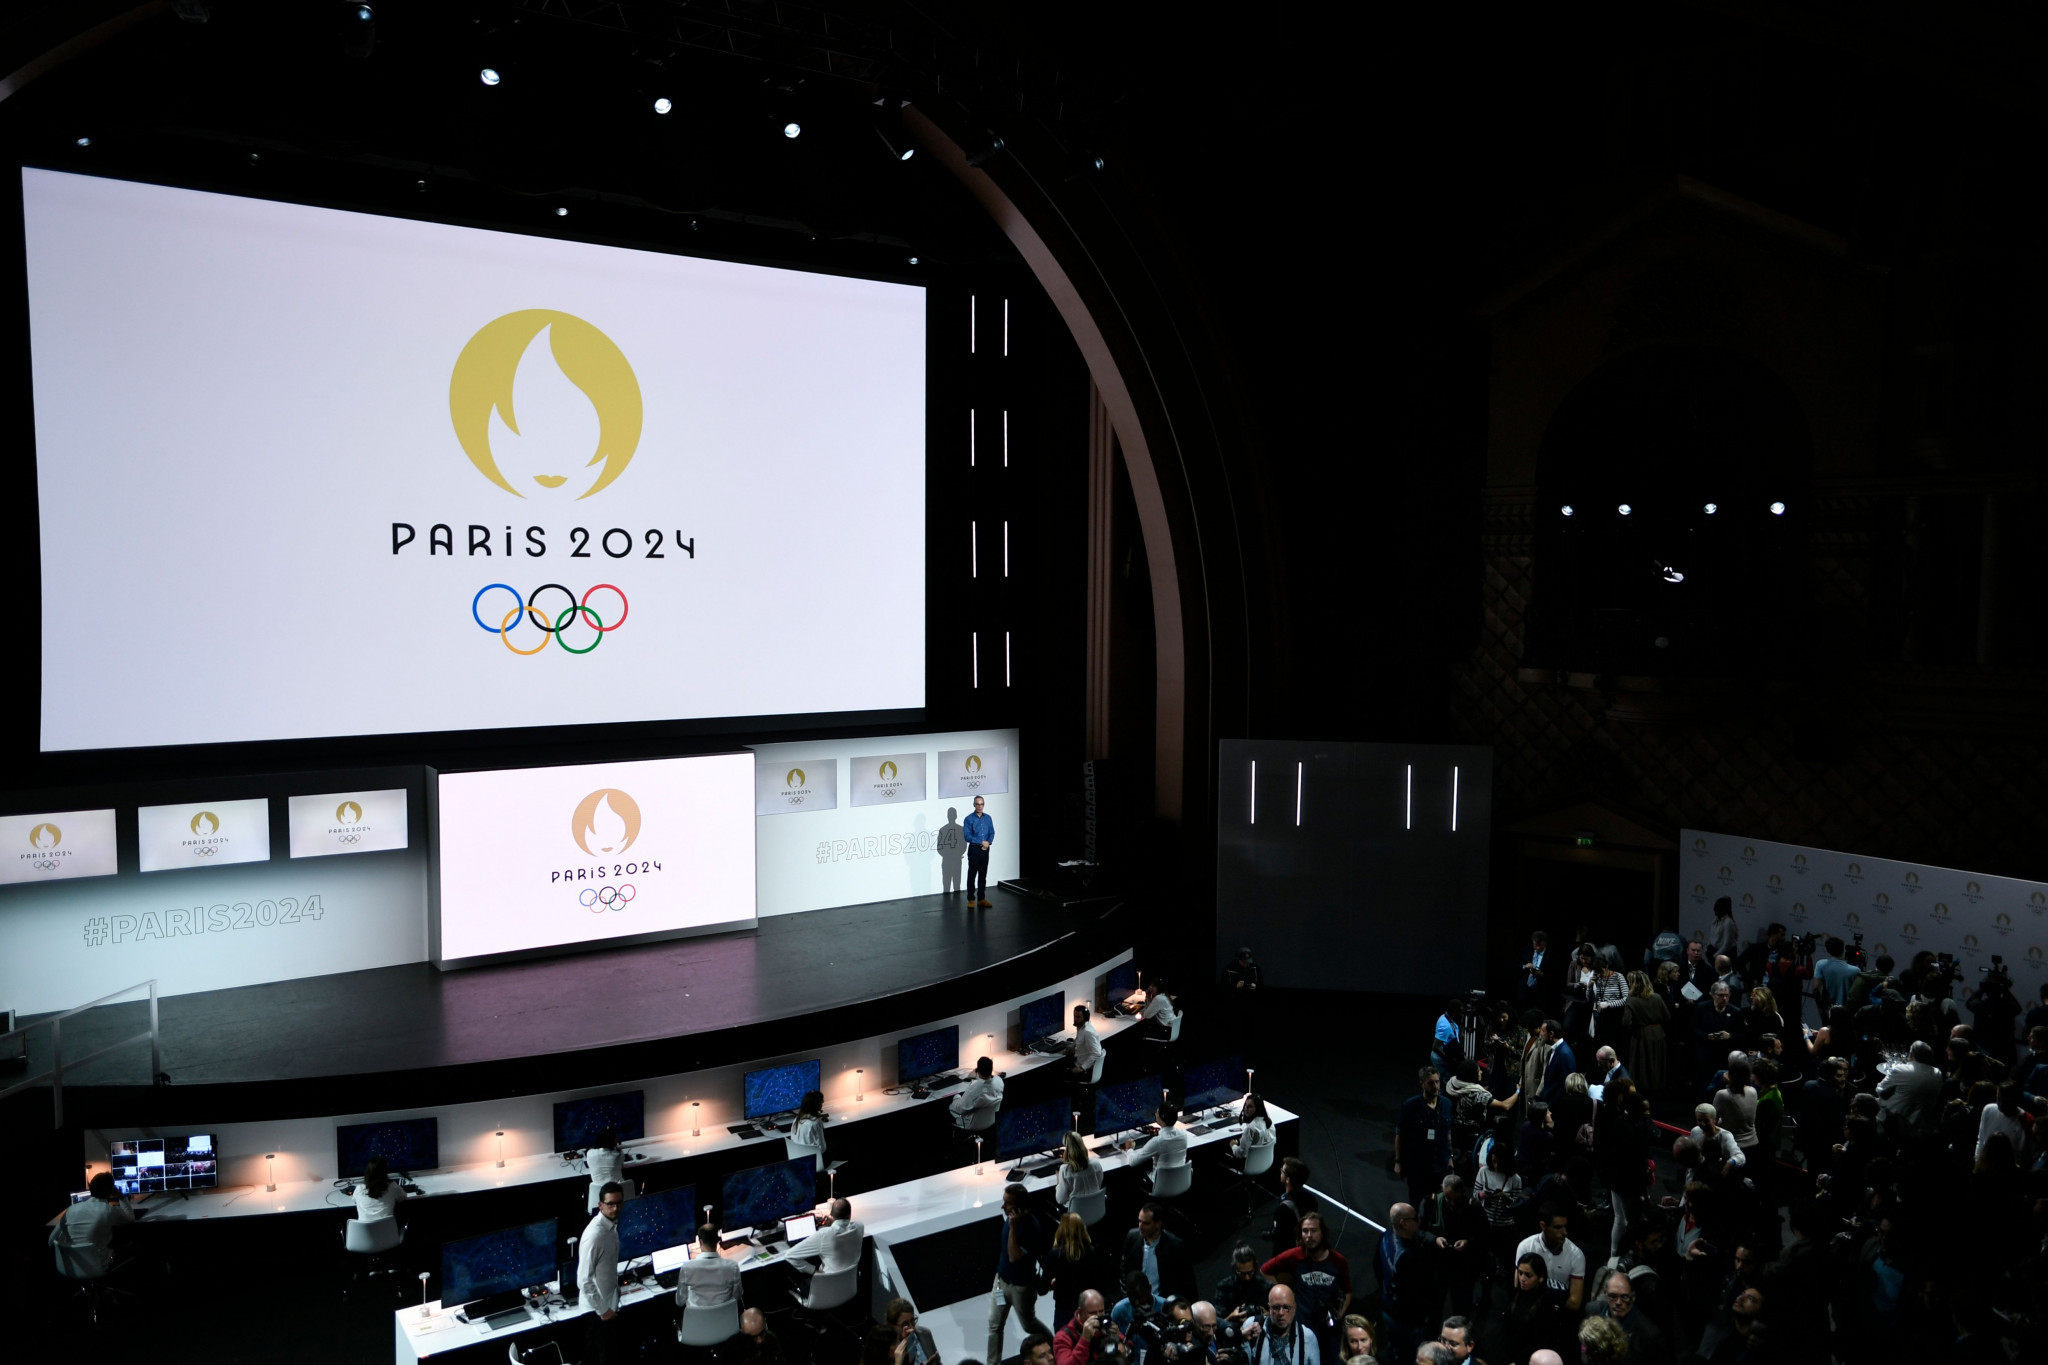 Paris 2024 and ESEC issue joint declaration